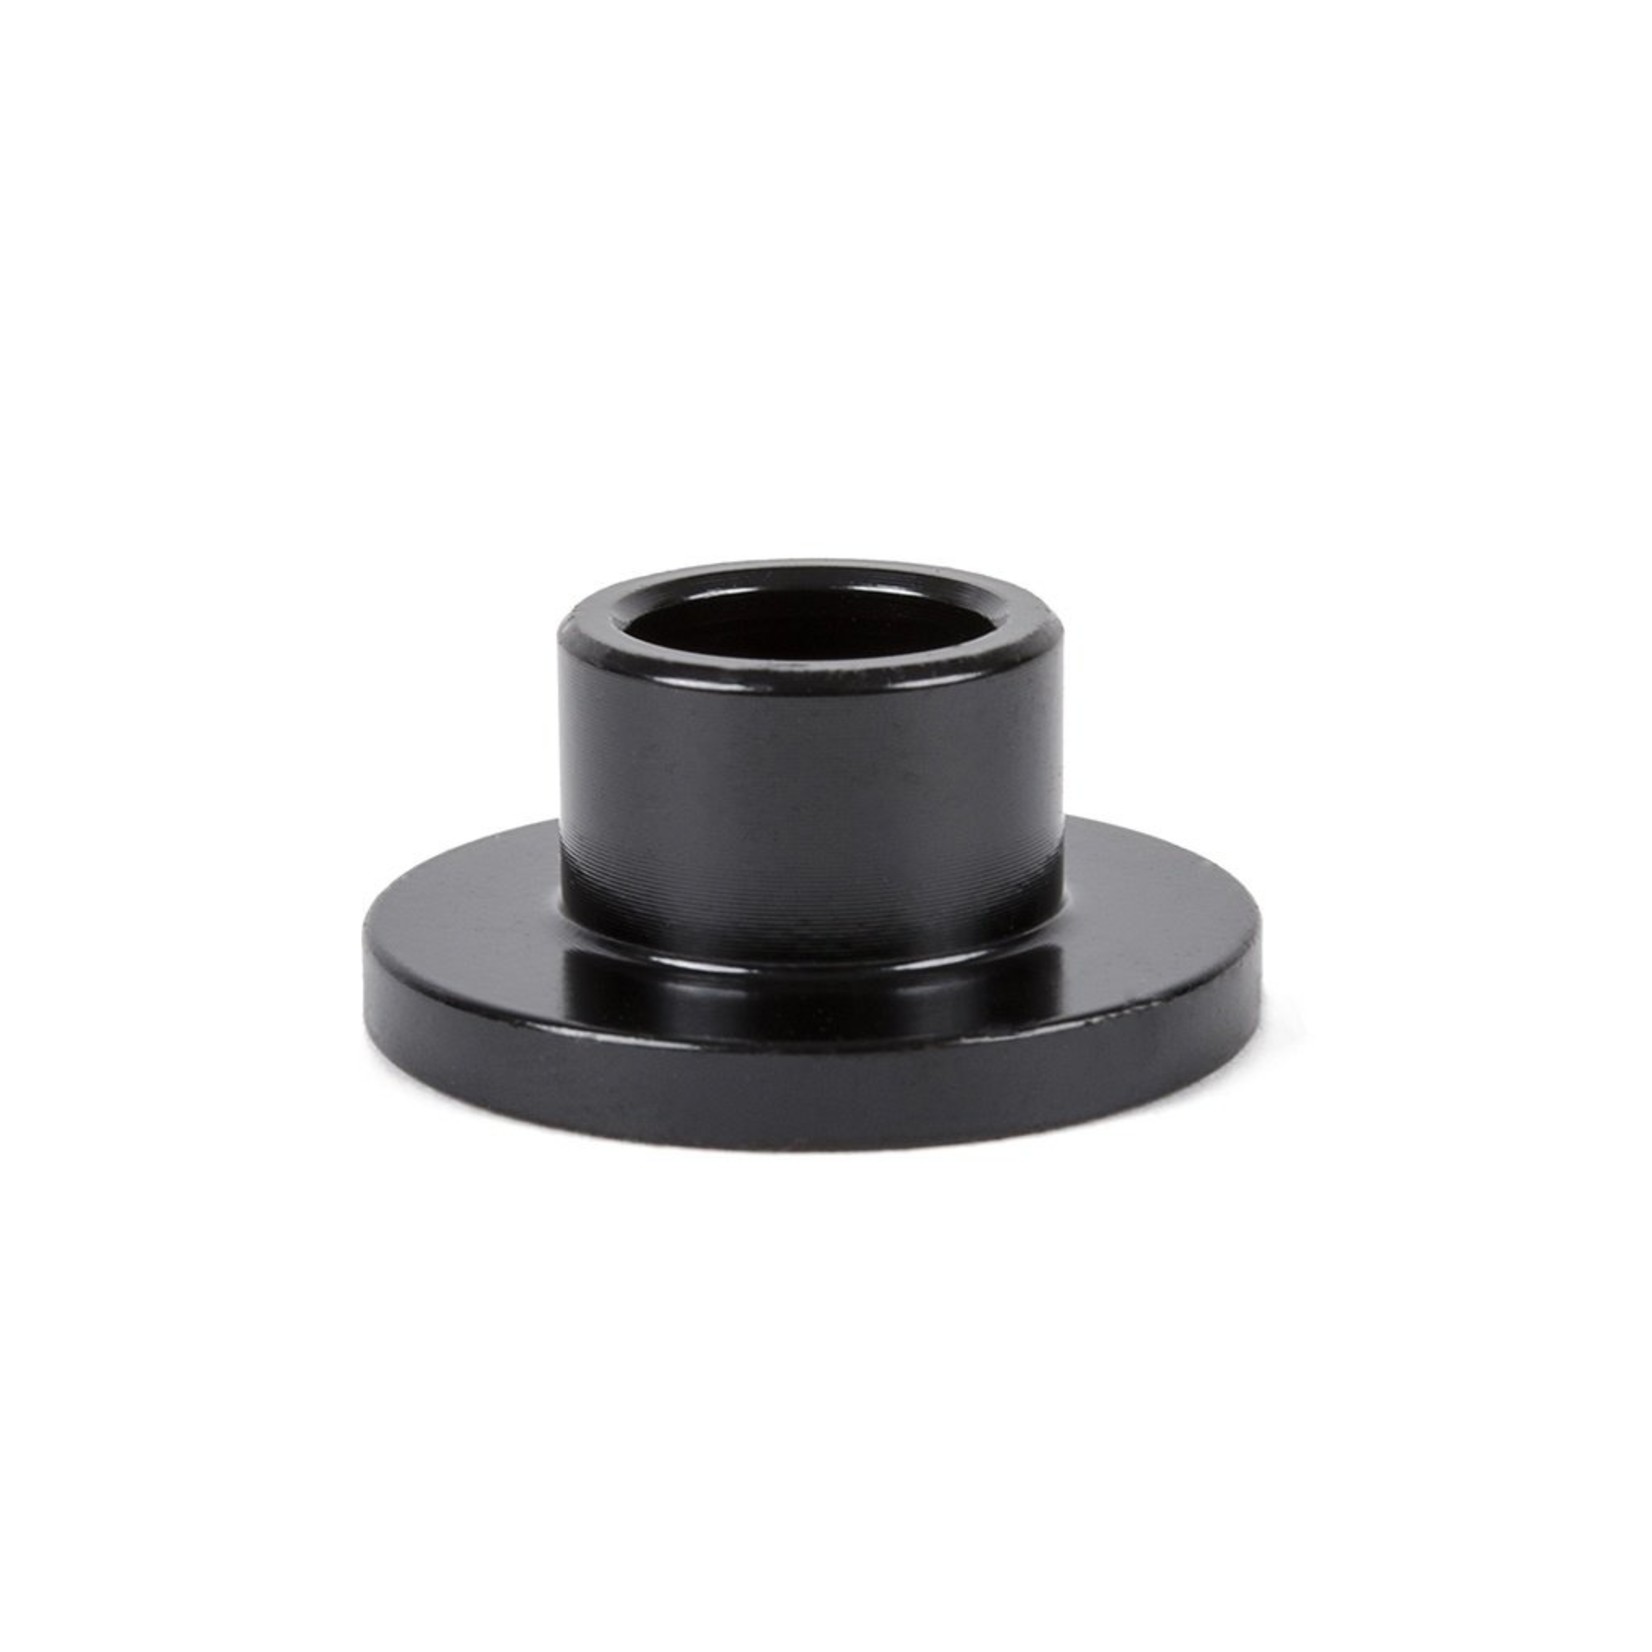 The Shadow Conspiracy TSC S.O.D Replacement 3/8'' Adaptor each